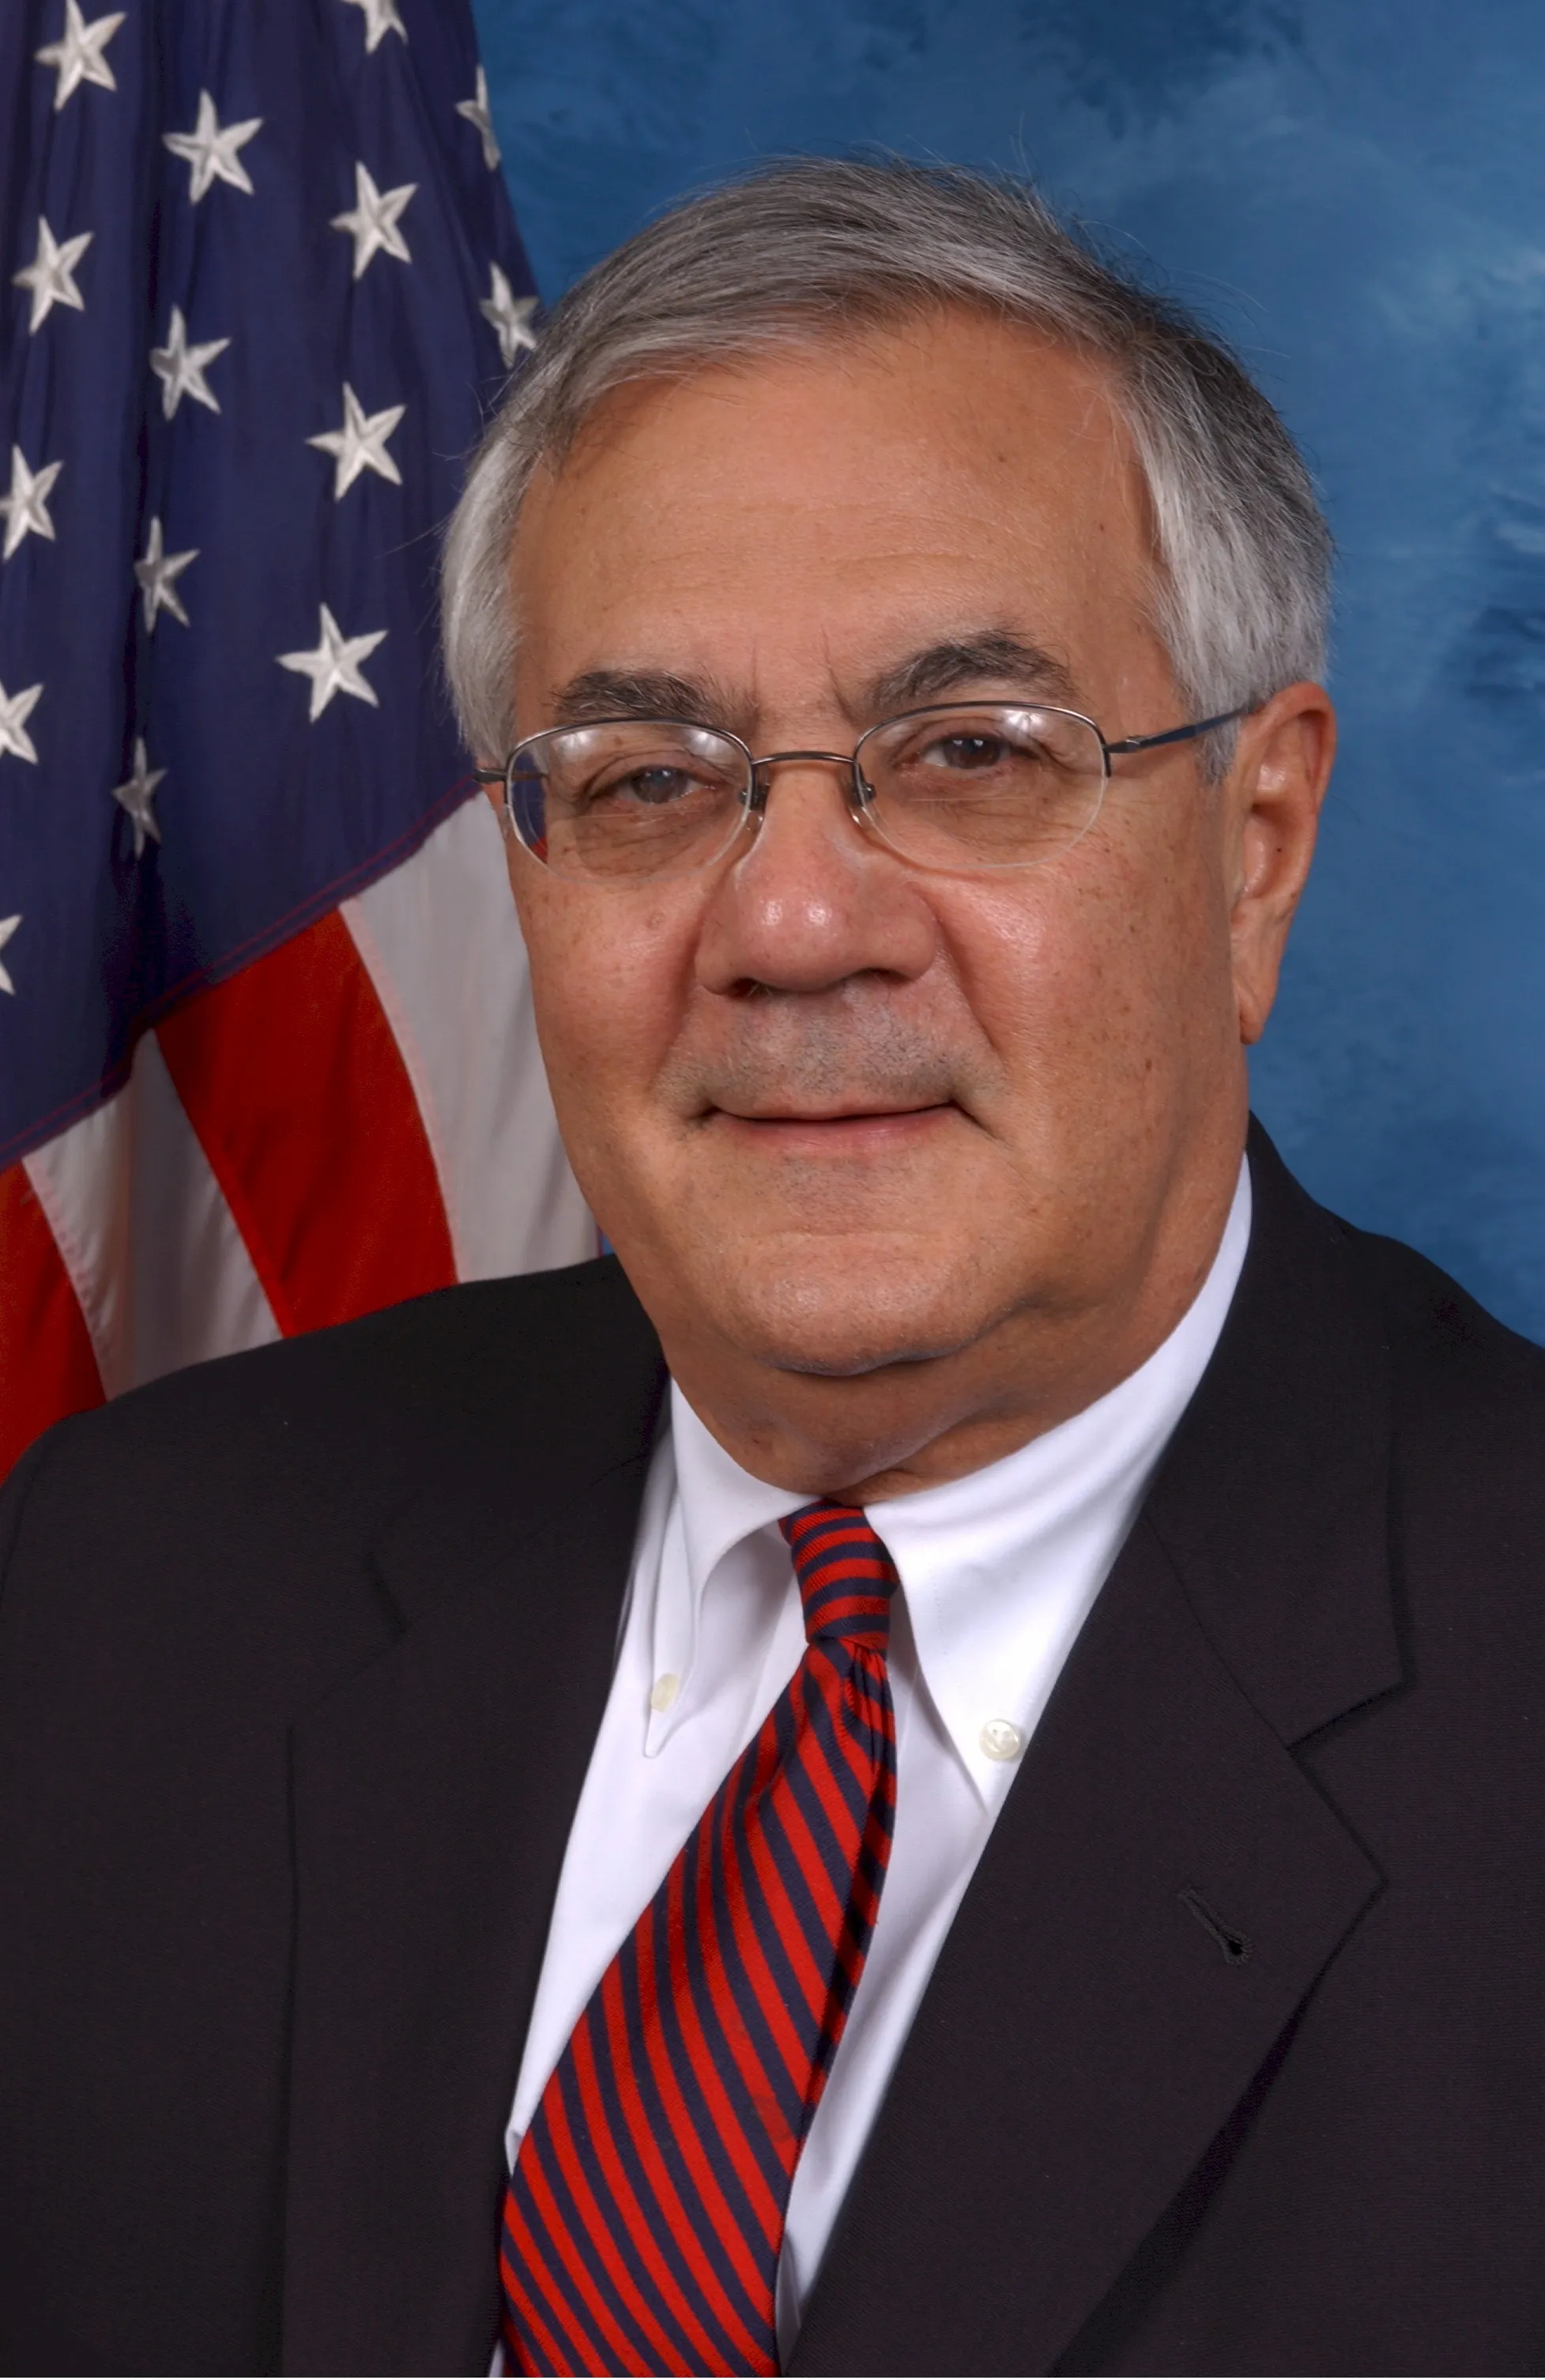 Barney Frank 'Not Optimistic' About HR 2267 Passage Before Midterm Elections